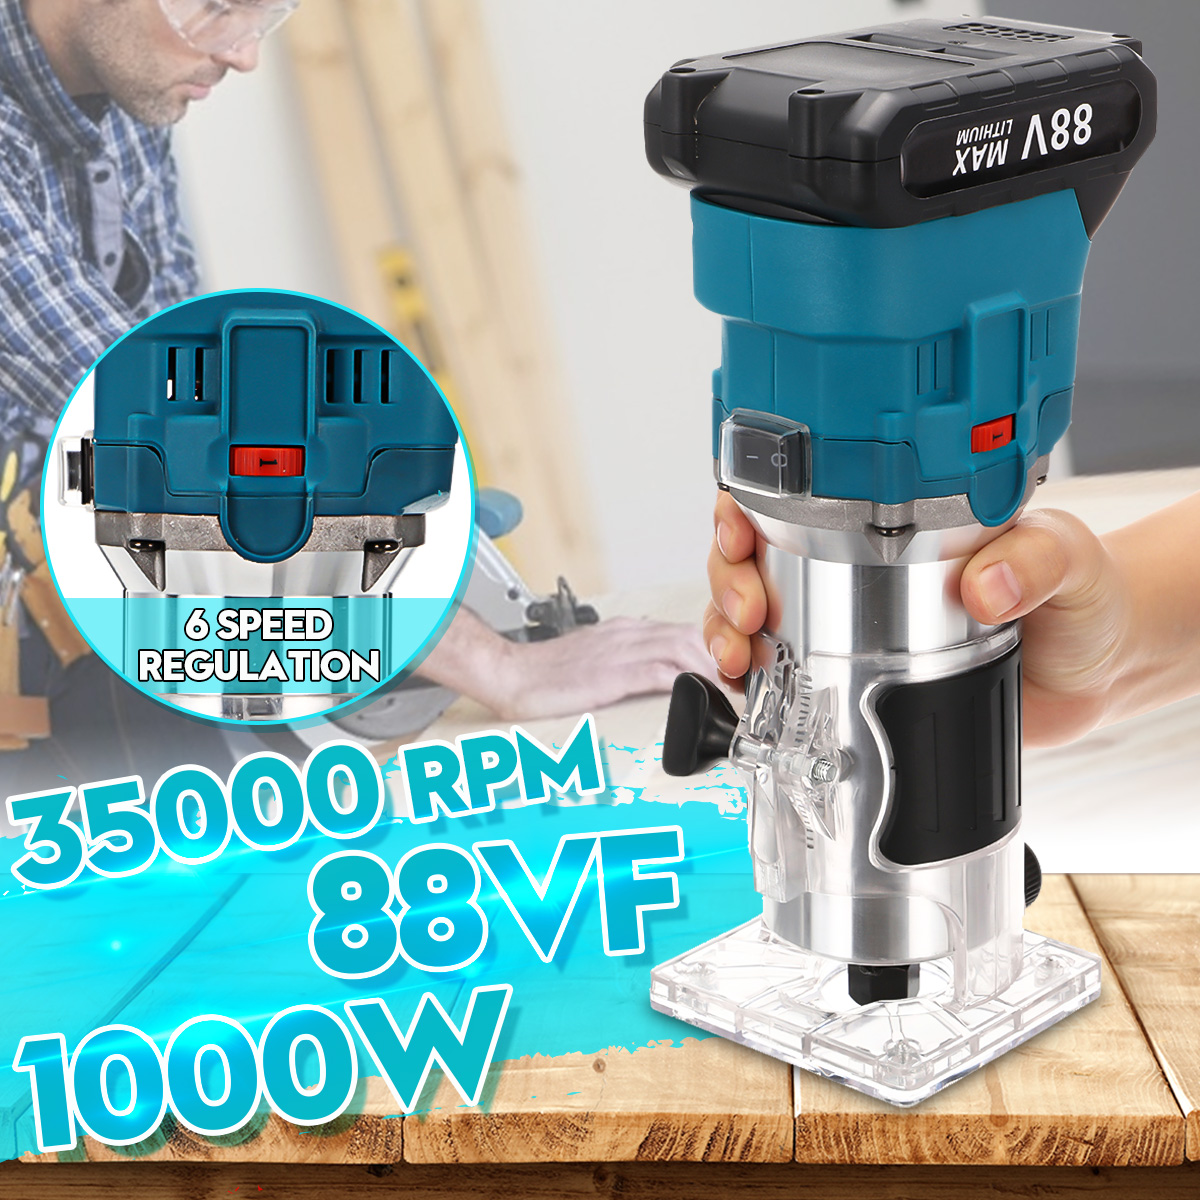 88VF-6-Speed-Regulated-Brushless-Cordless-Handheld-Electric-Trimmer-Woodworking-Engraving-Slotting-T-1849830-2